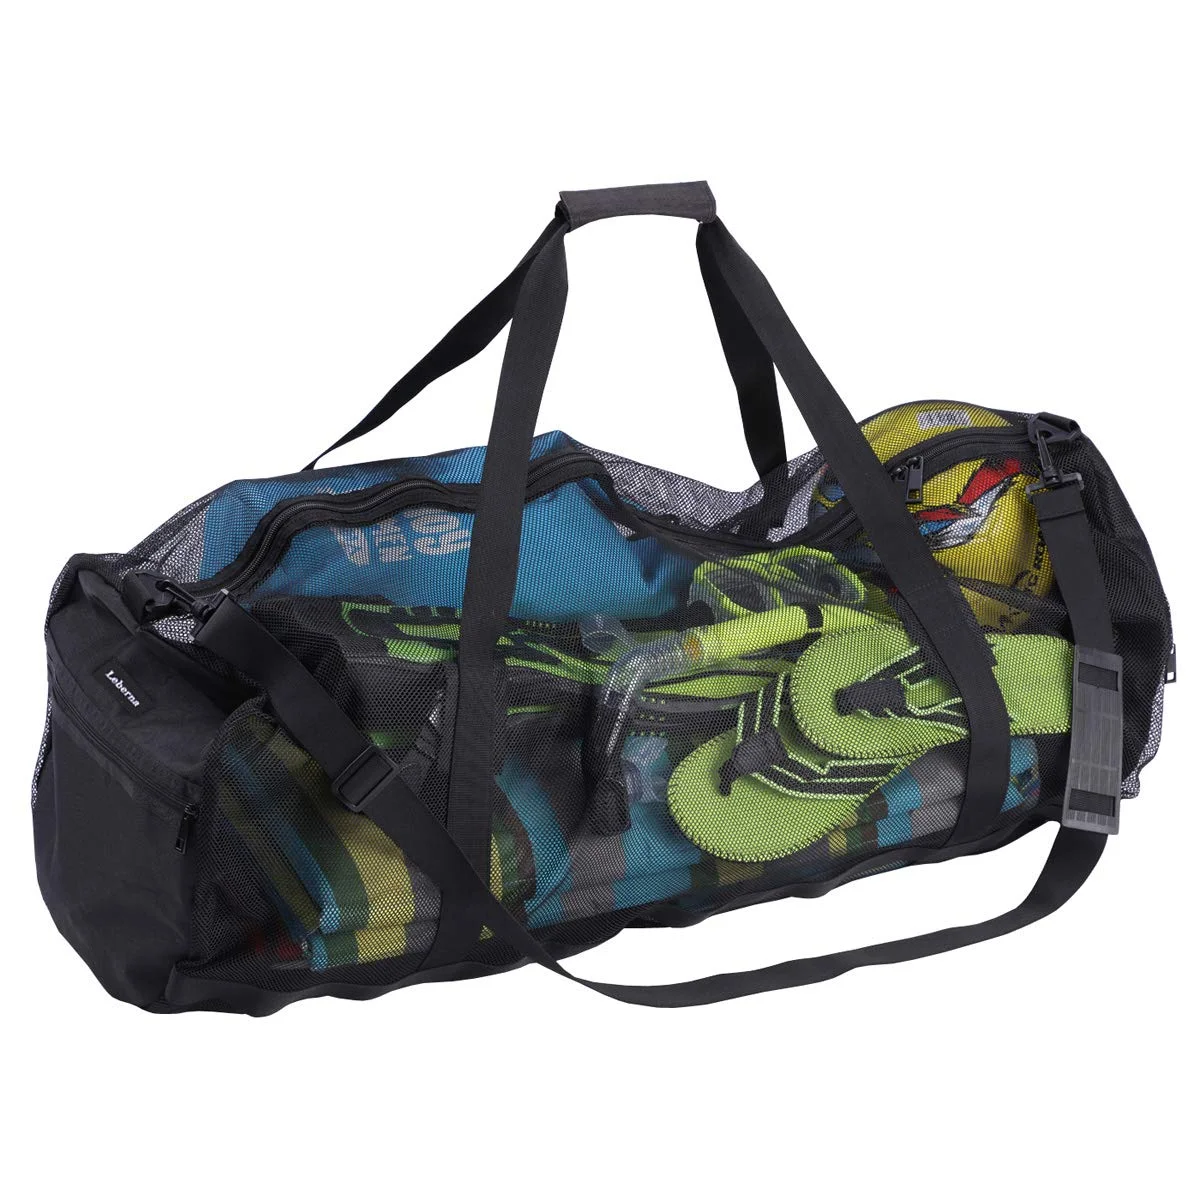 Extra Large Beach Bags and Totes with Zipper and Pockets Diving Snorkel Gear Bags Oversized Beach Duffle Bag Ideal for Your Pool Trip XXL Mesh Dive Bag for Scuba or Snorkeling 